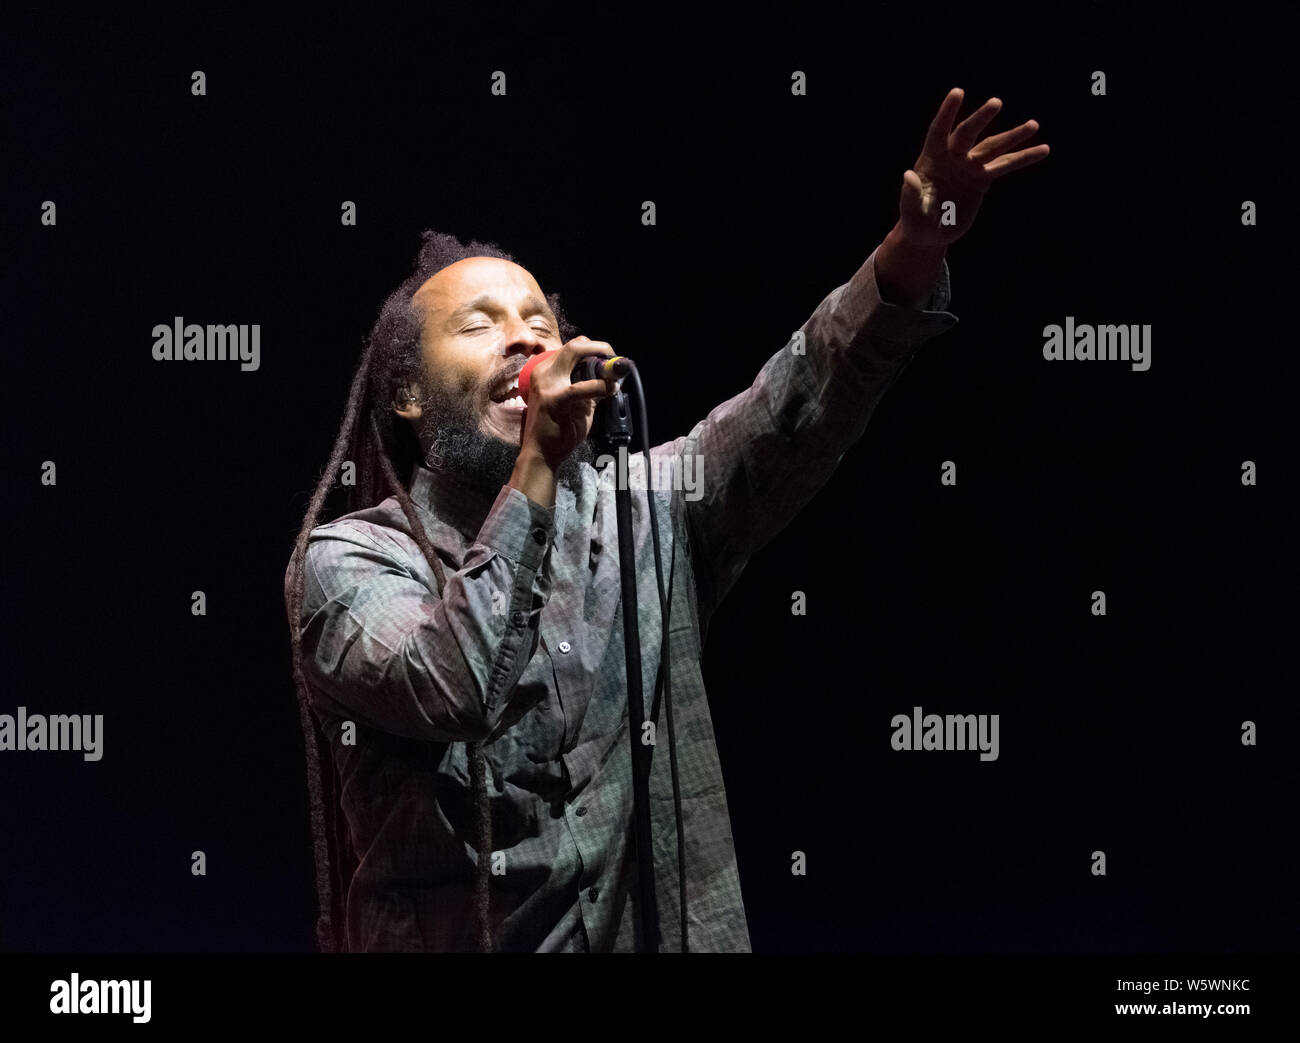 Ziggy Marley performing at the WOMAD festival, Charlton Park, UK. July 26, 2019 Stock Photo